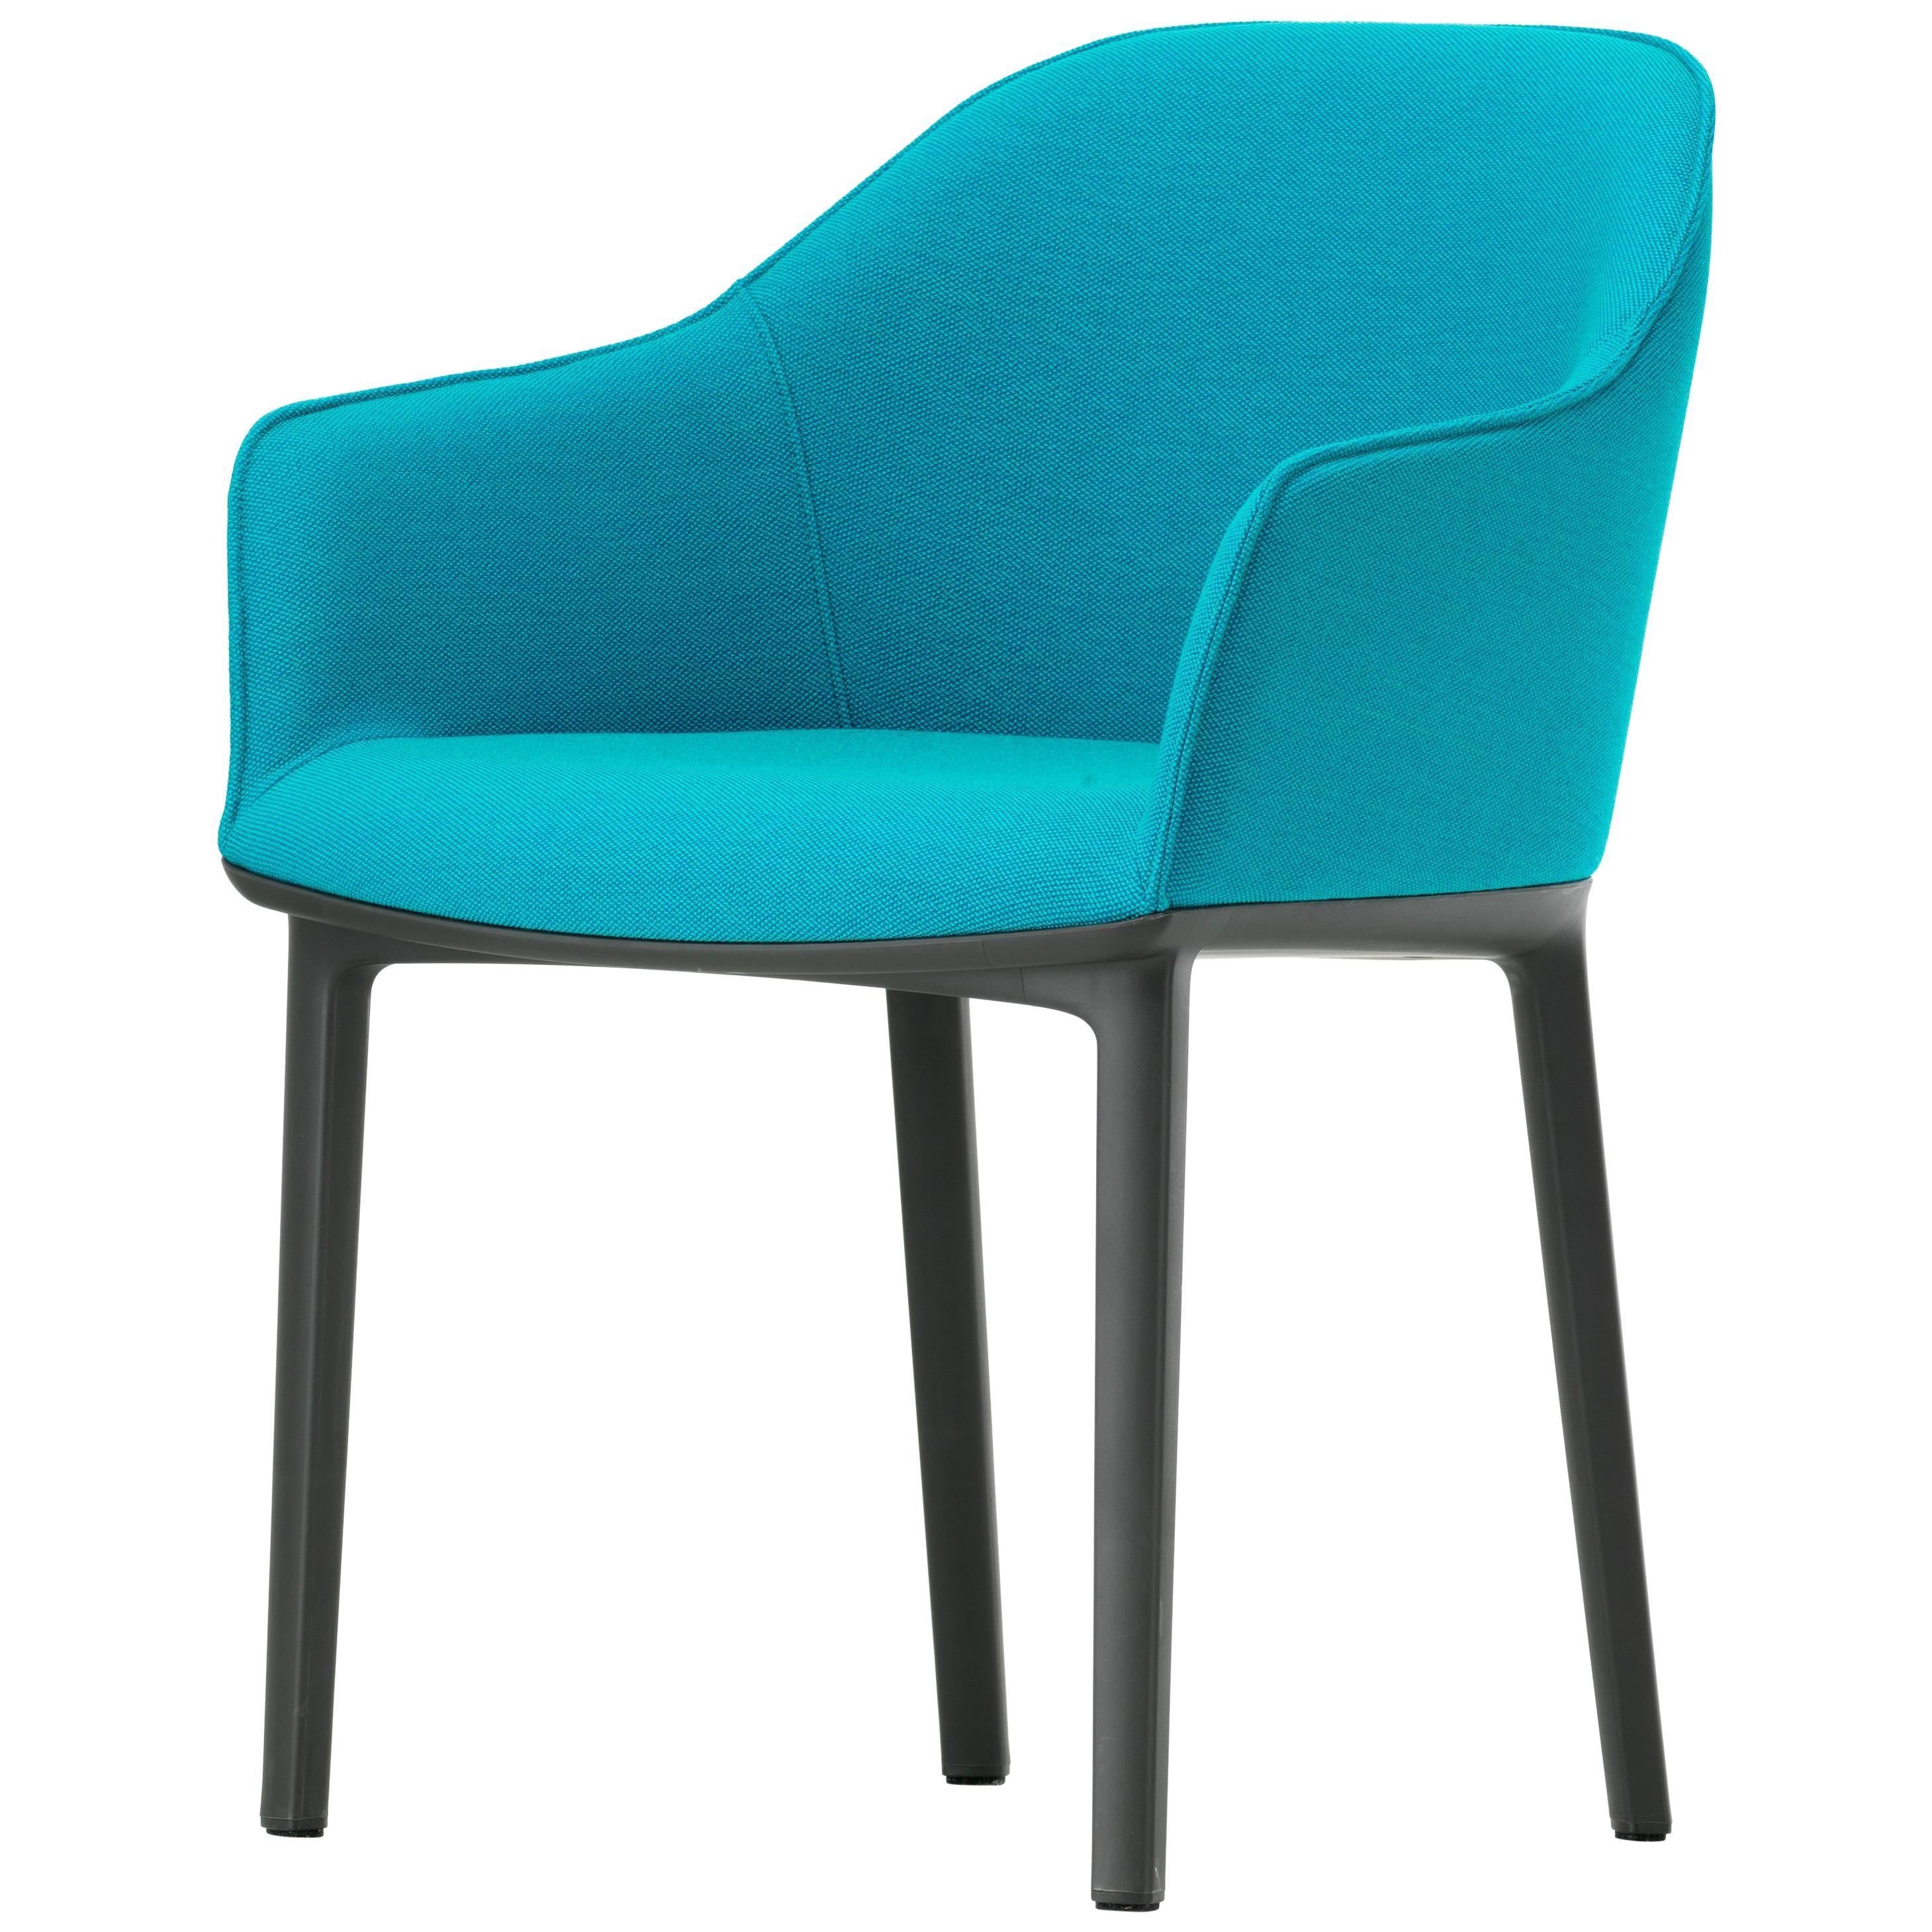 Vitra Soft Shell Chair in Turquoise & Aqua Moss by Ronan & Erwan Bouroullec im Angebot